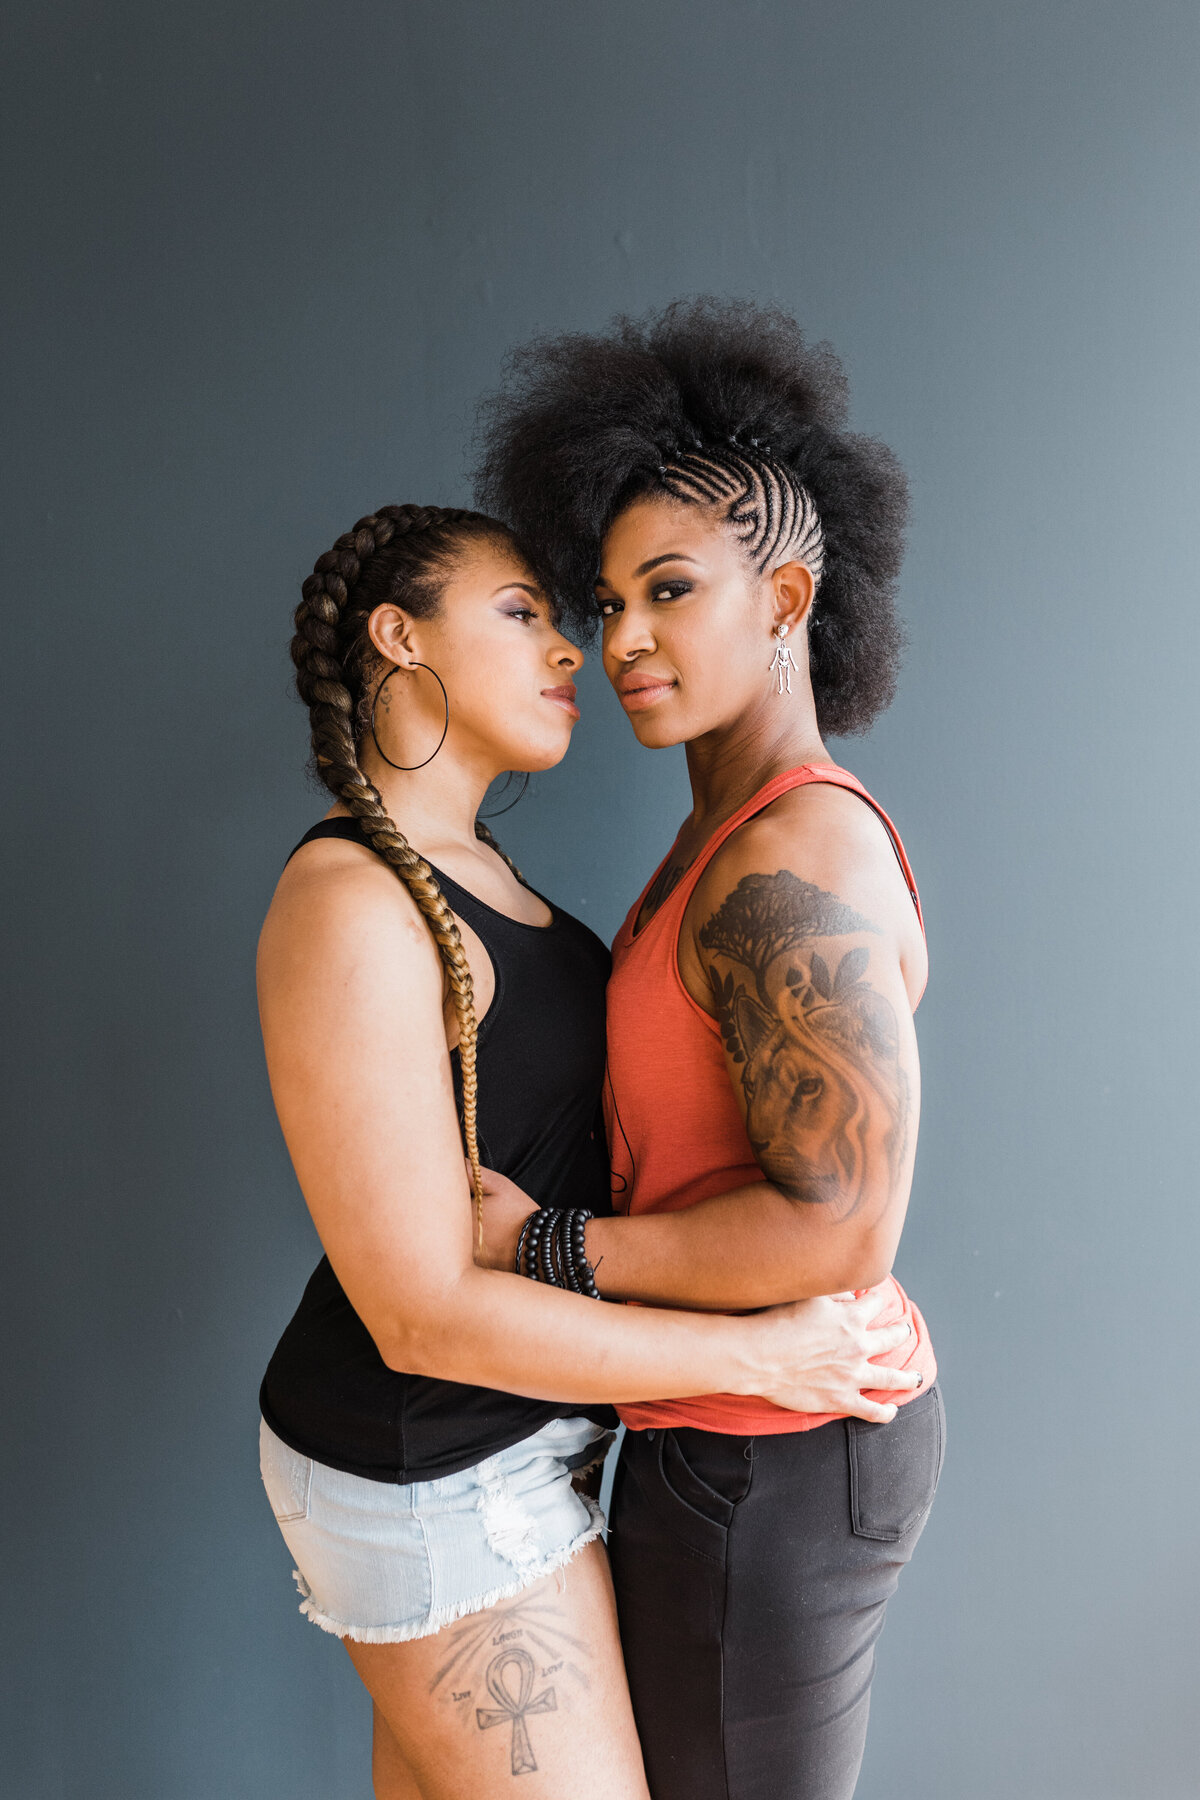 Two women posing intimately during their studio engagement photoshoot in Dallas, Texas. They are both holding each other close in front of a dark background. The woman on the left is wearing a black tank top with cutoff denim shorts. The woman on the right is wearing an orange tank top with black jeans. Both have intricate braids and tattoos.